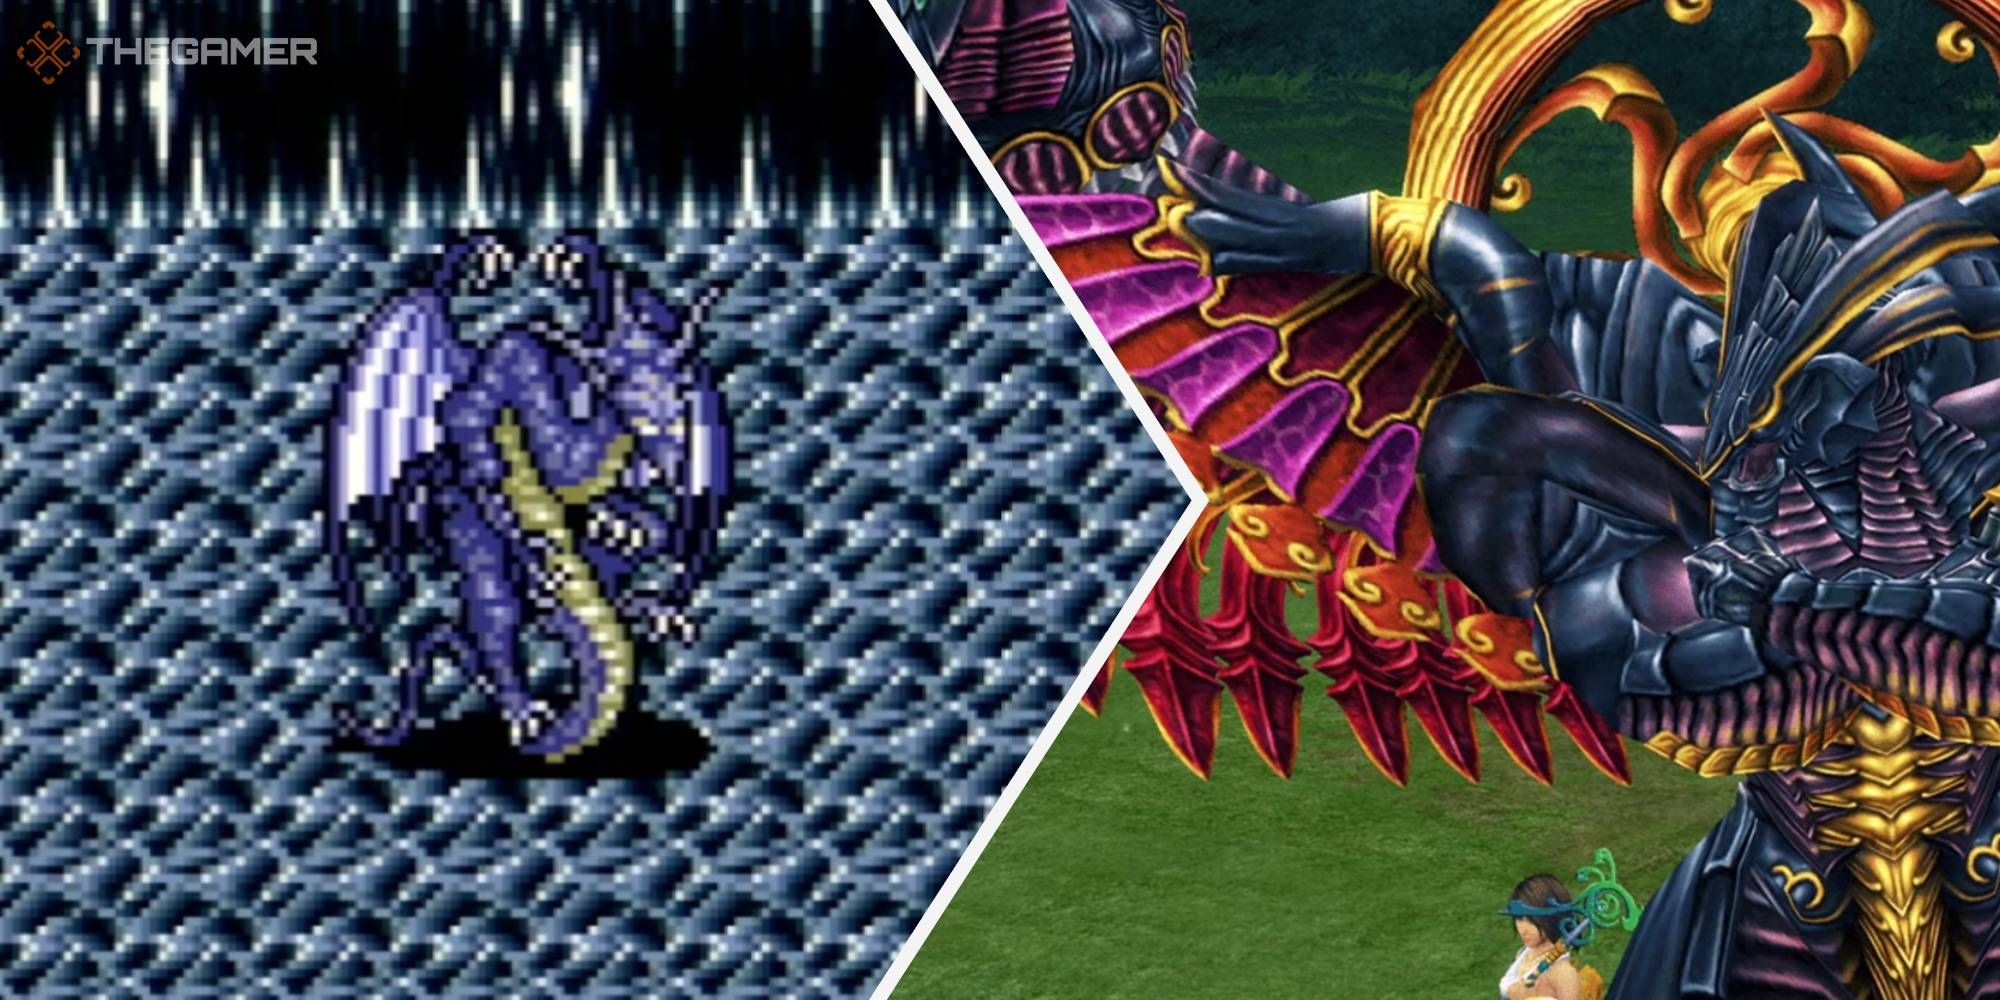 Final Fantasy 4's Bahamut seems to have a showdown with Final Fantasy 10's Bahamut